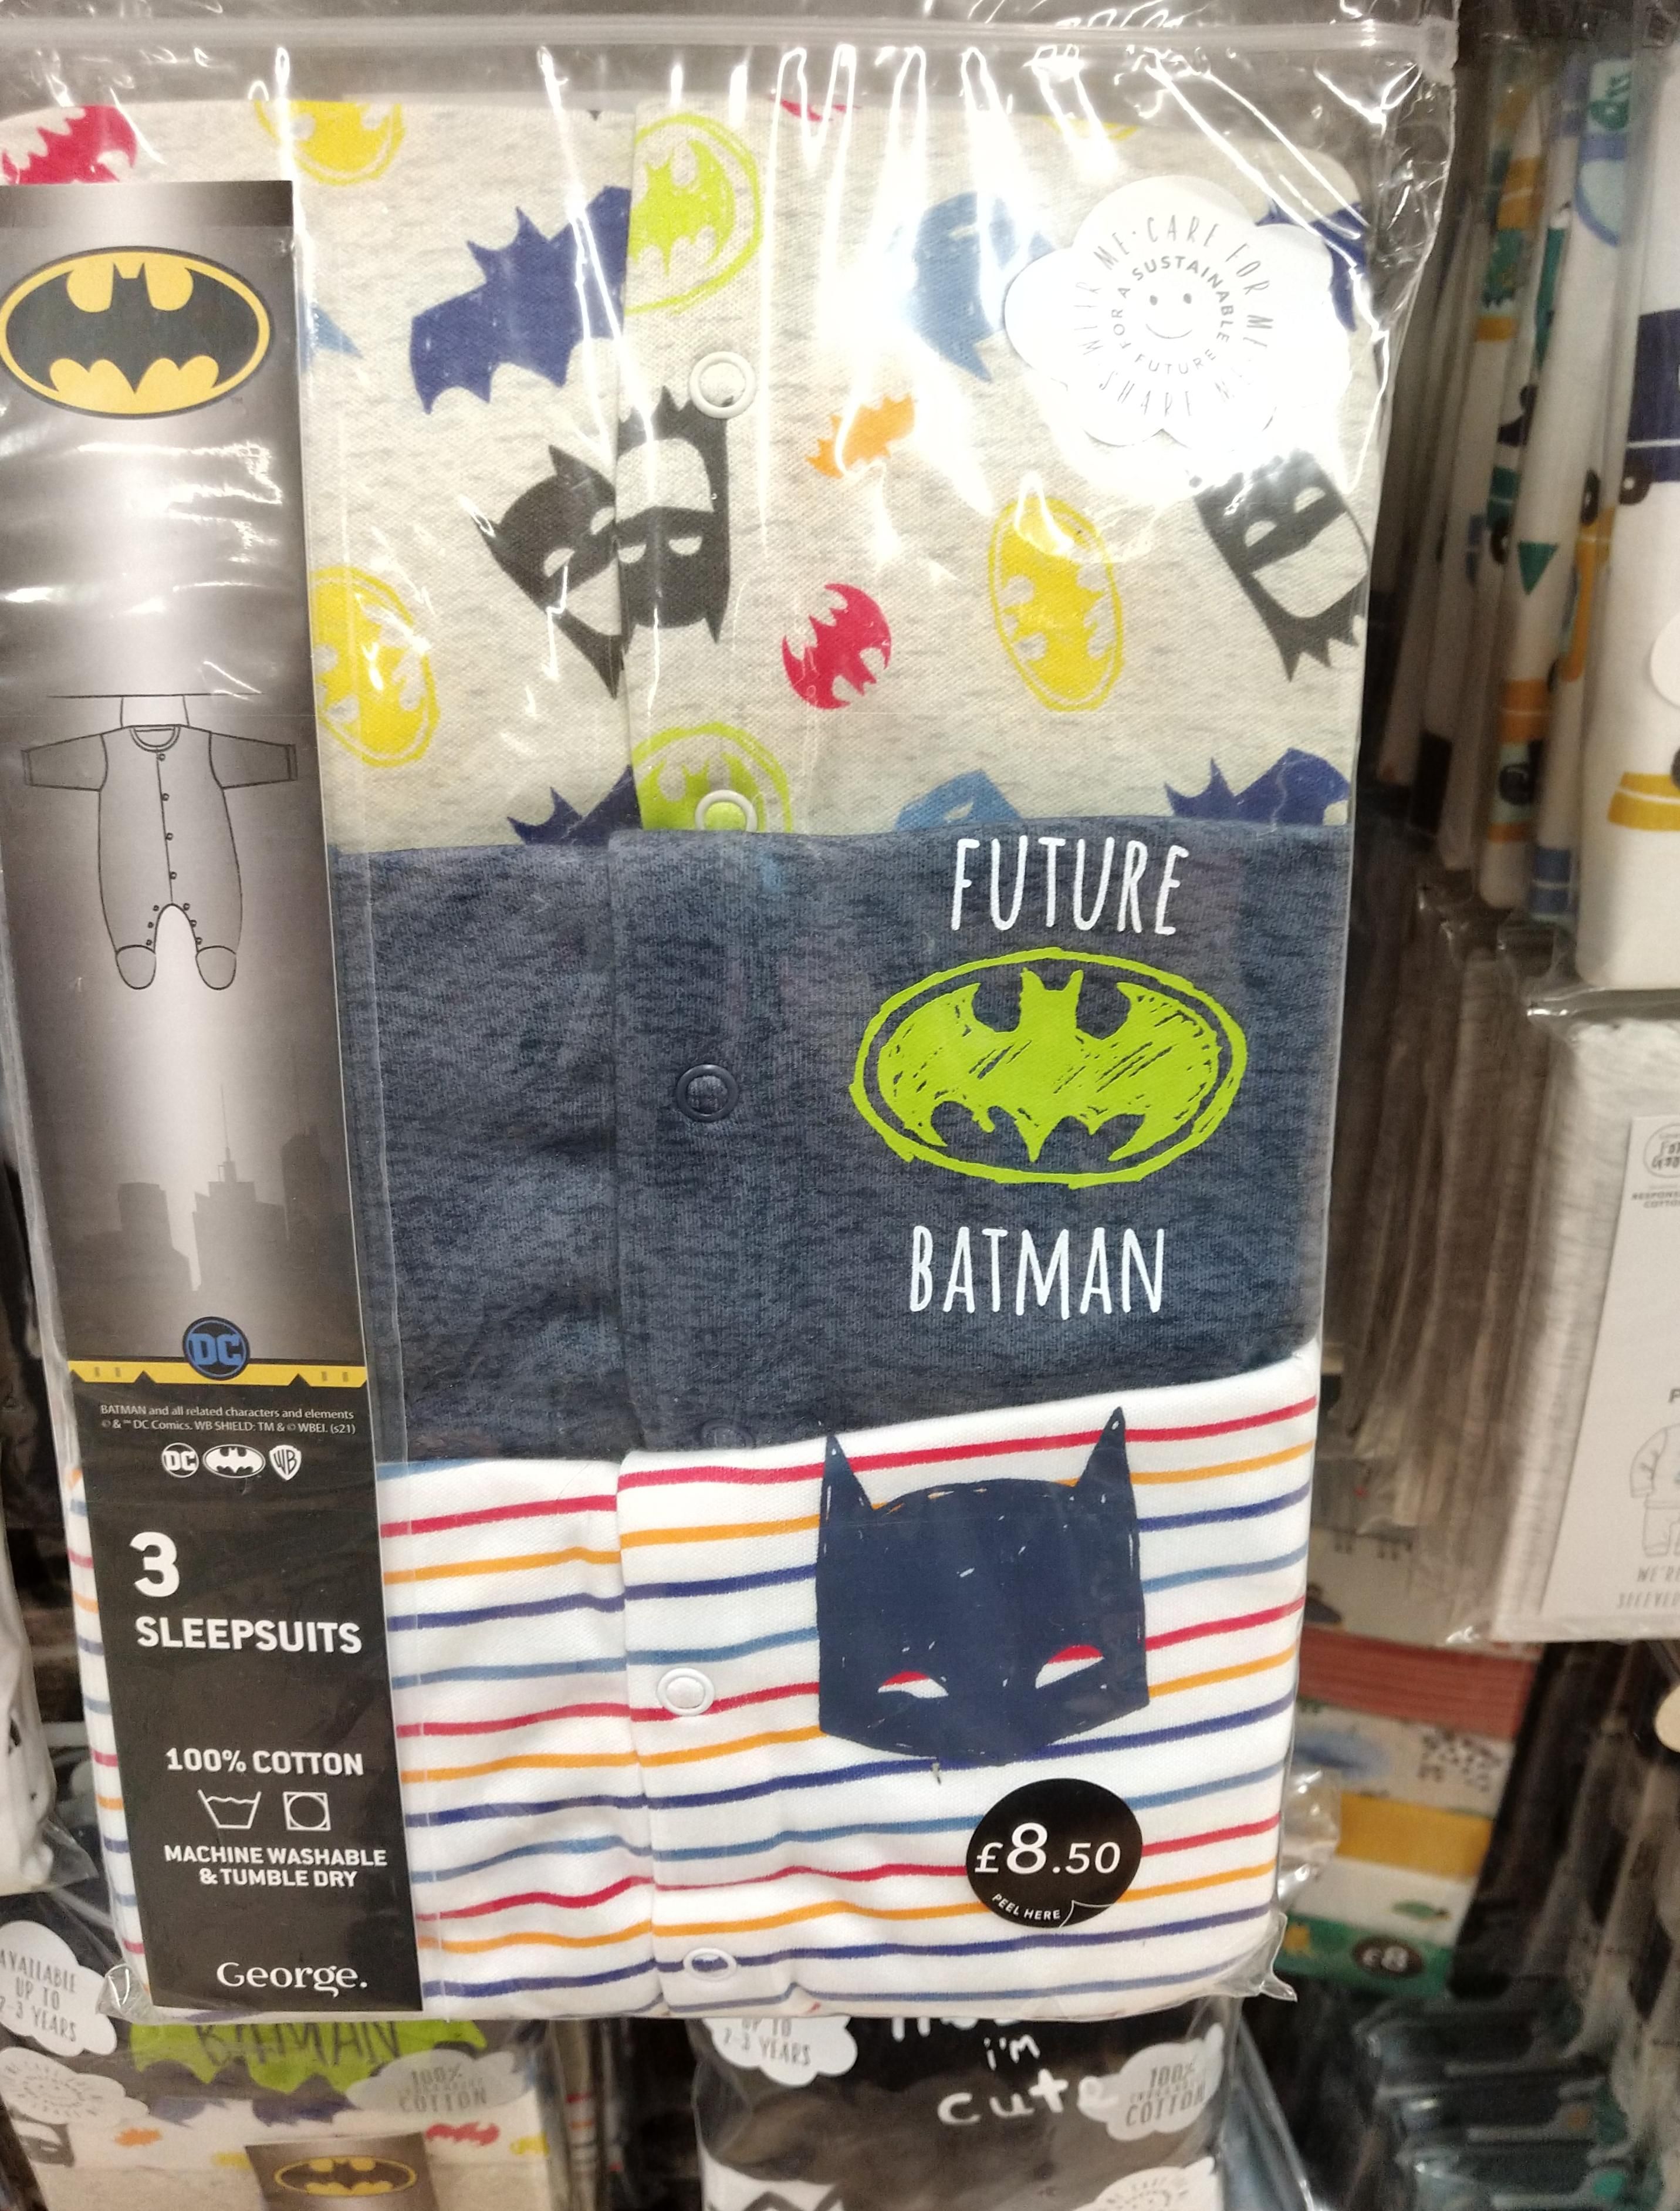 Whoever designed this baby sleepsuit did not consider the implications